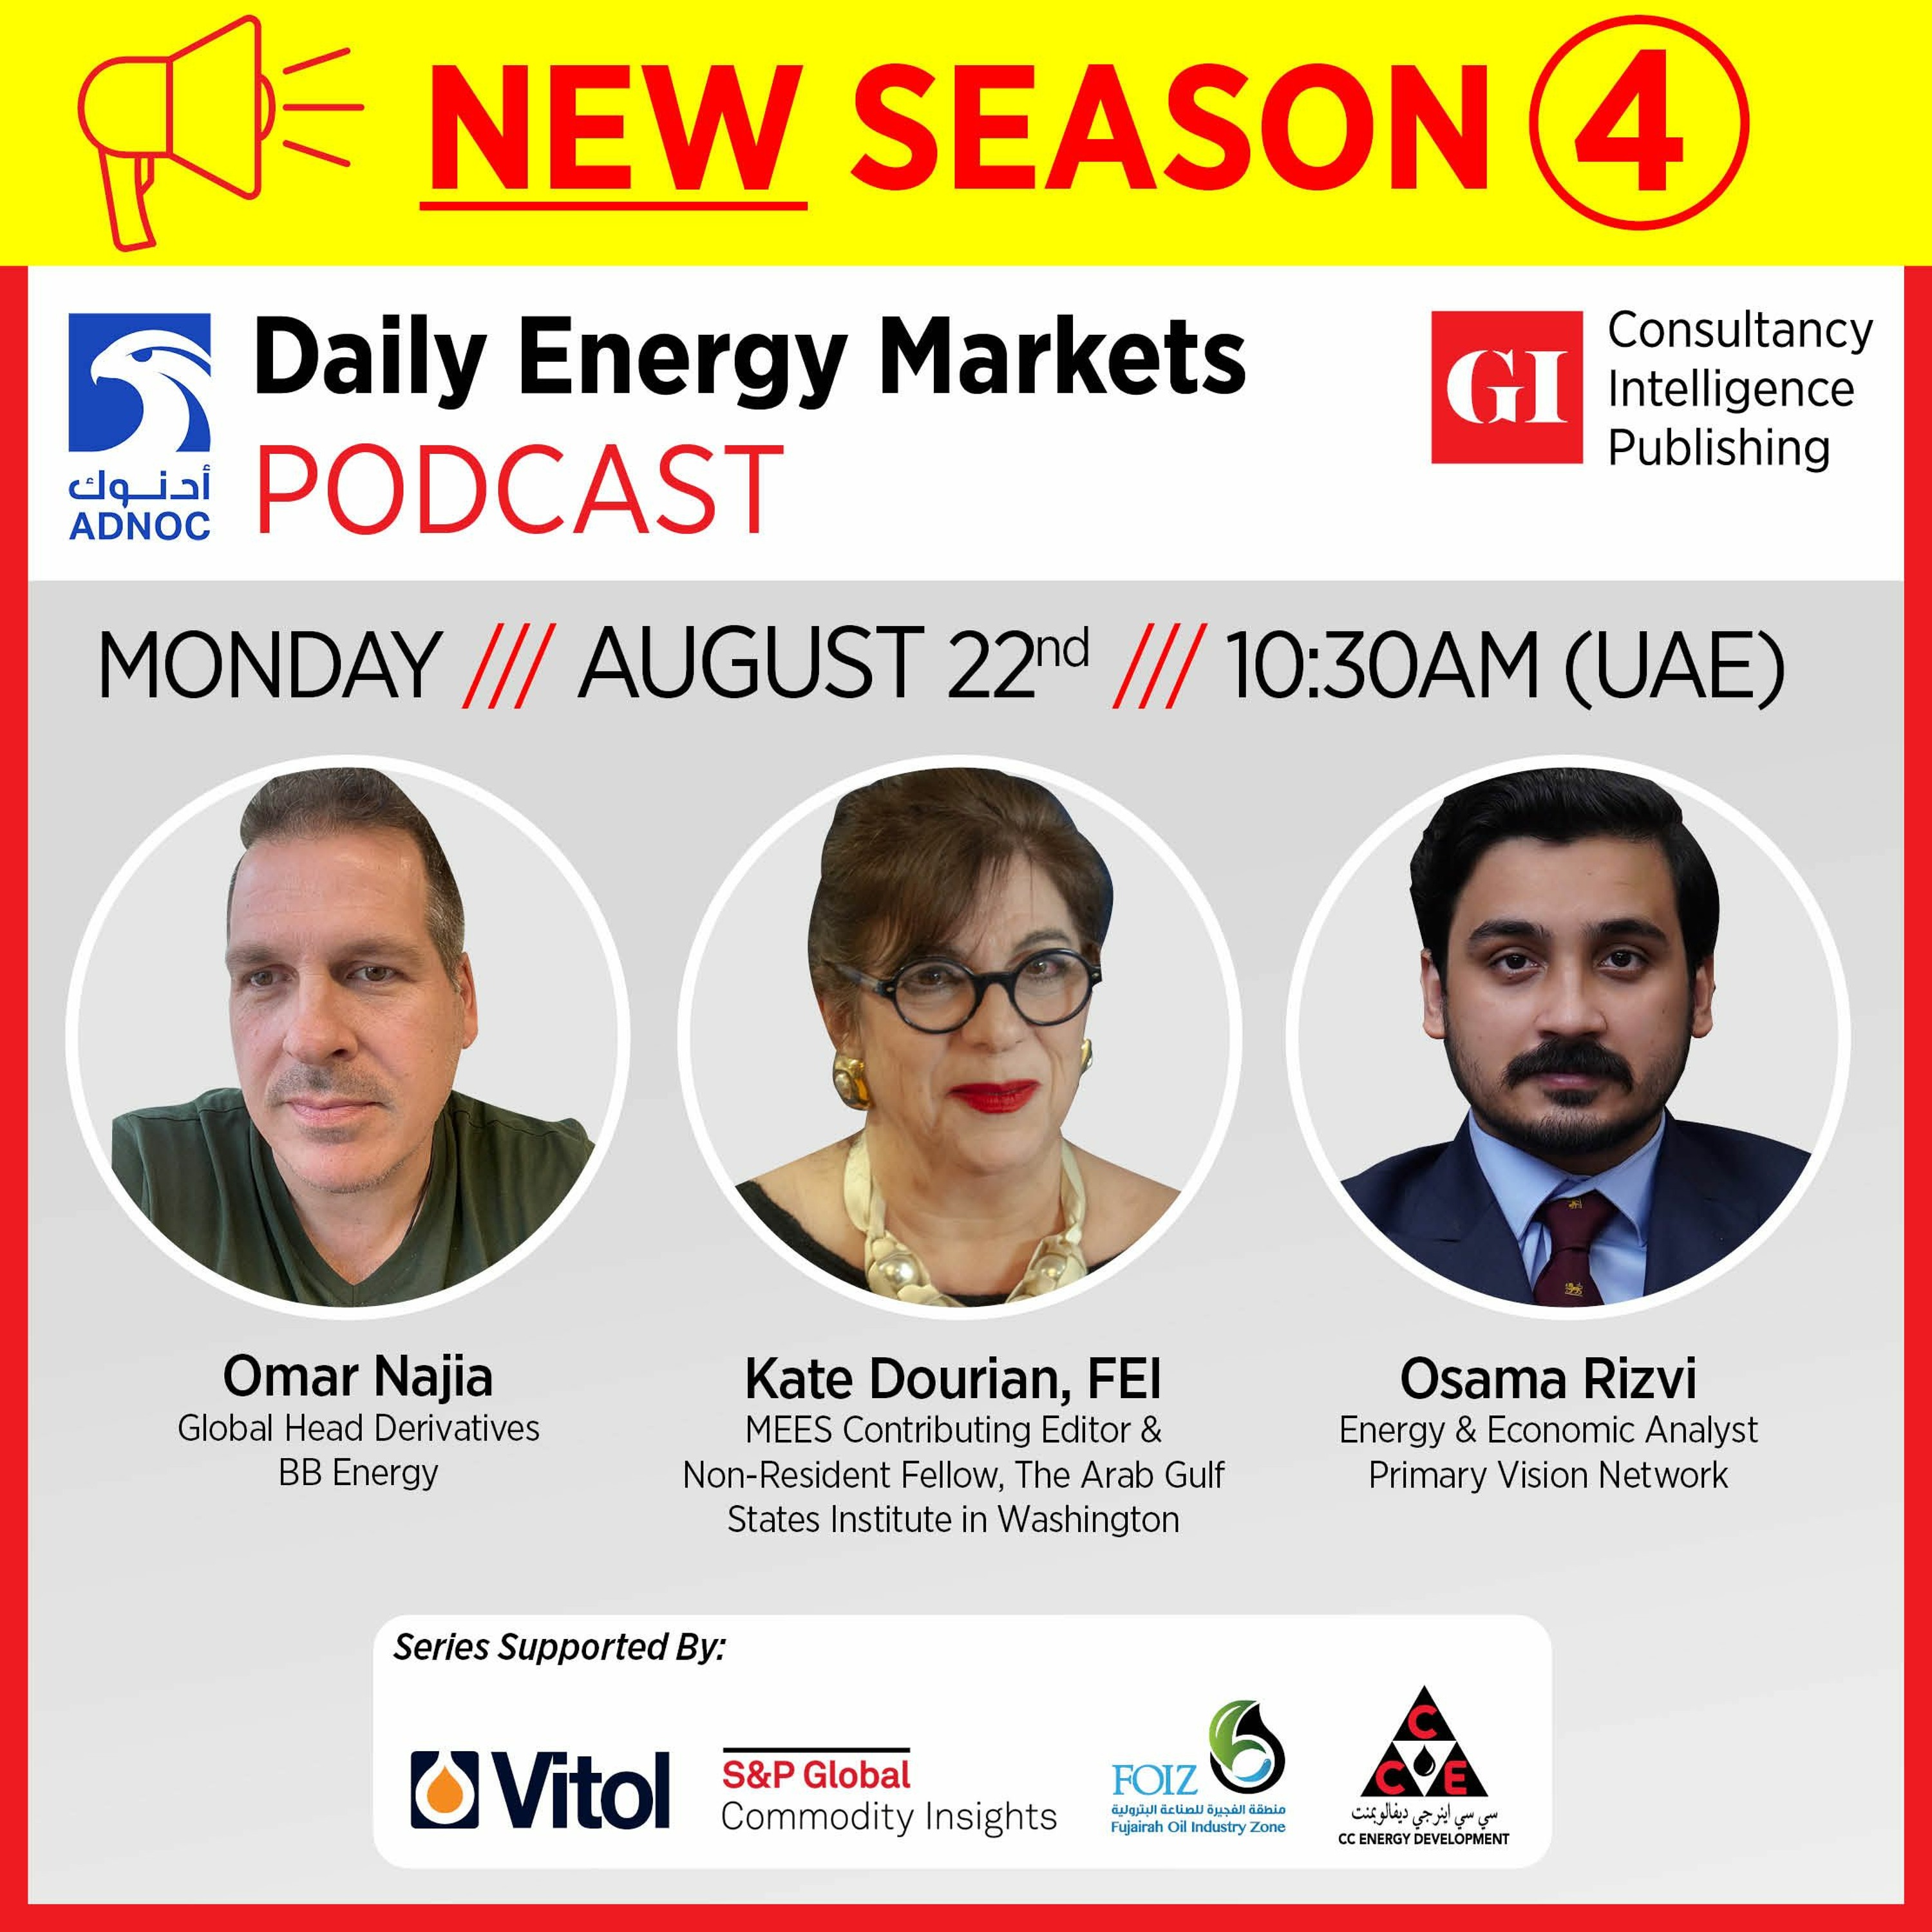 PODCAST: Daily Energy Markets - August 22